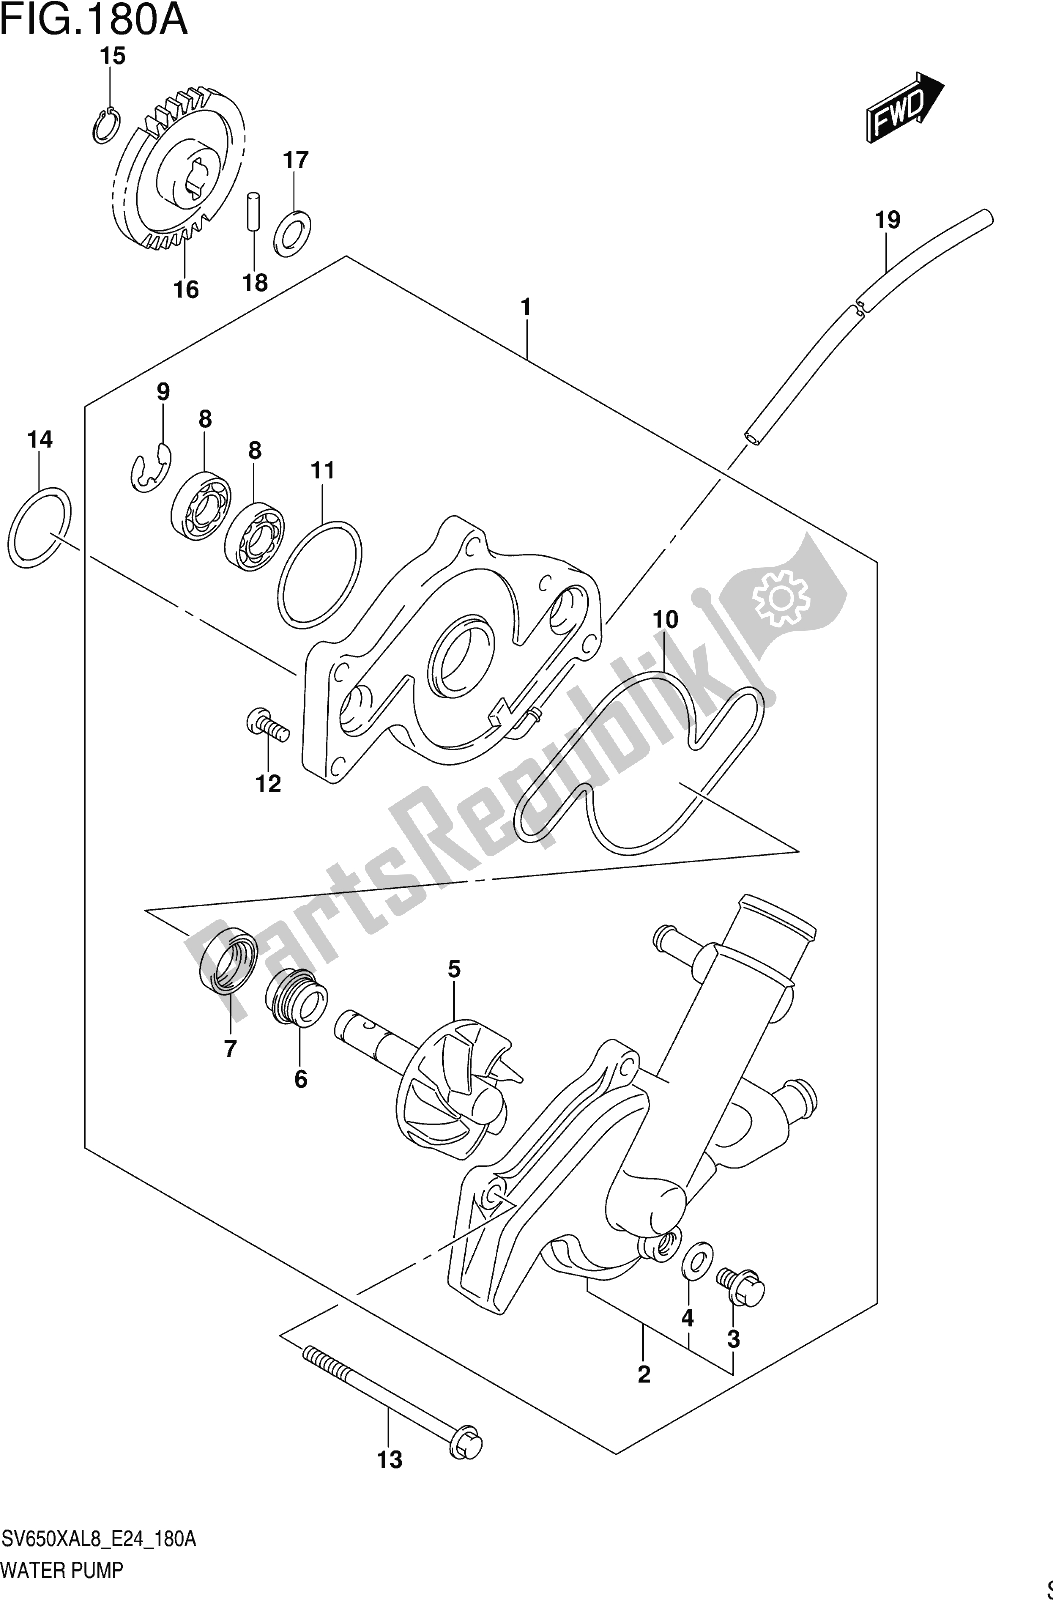 All parts for the Fig. 180a Water Pump of the Suzuki SV 650 XA 2018